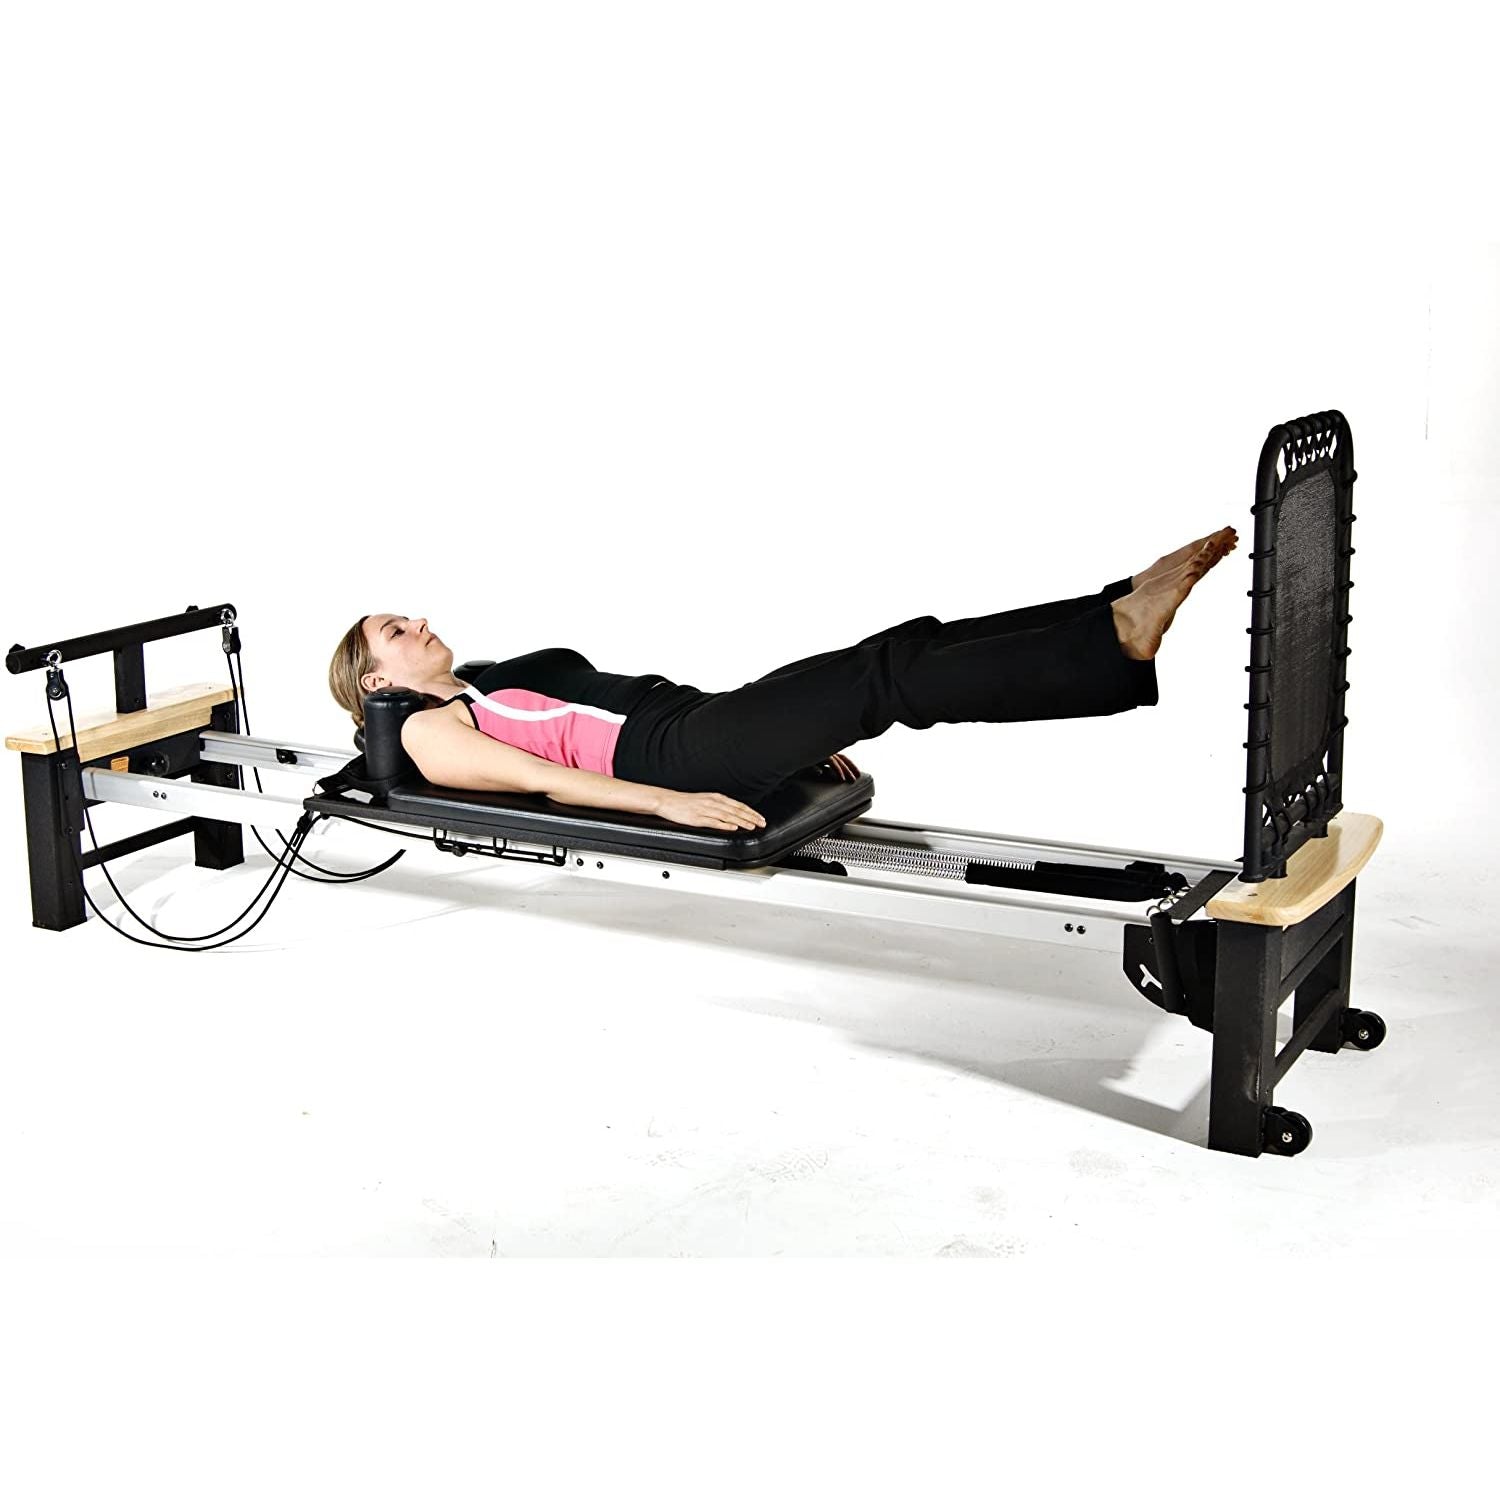 Pilates Reformer Machine for Home Workouts with Foldable Frame, Pilates  Reformer with 5 Resistance Cords, Easy to Move and Store, Features Sturdy